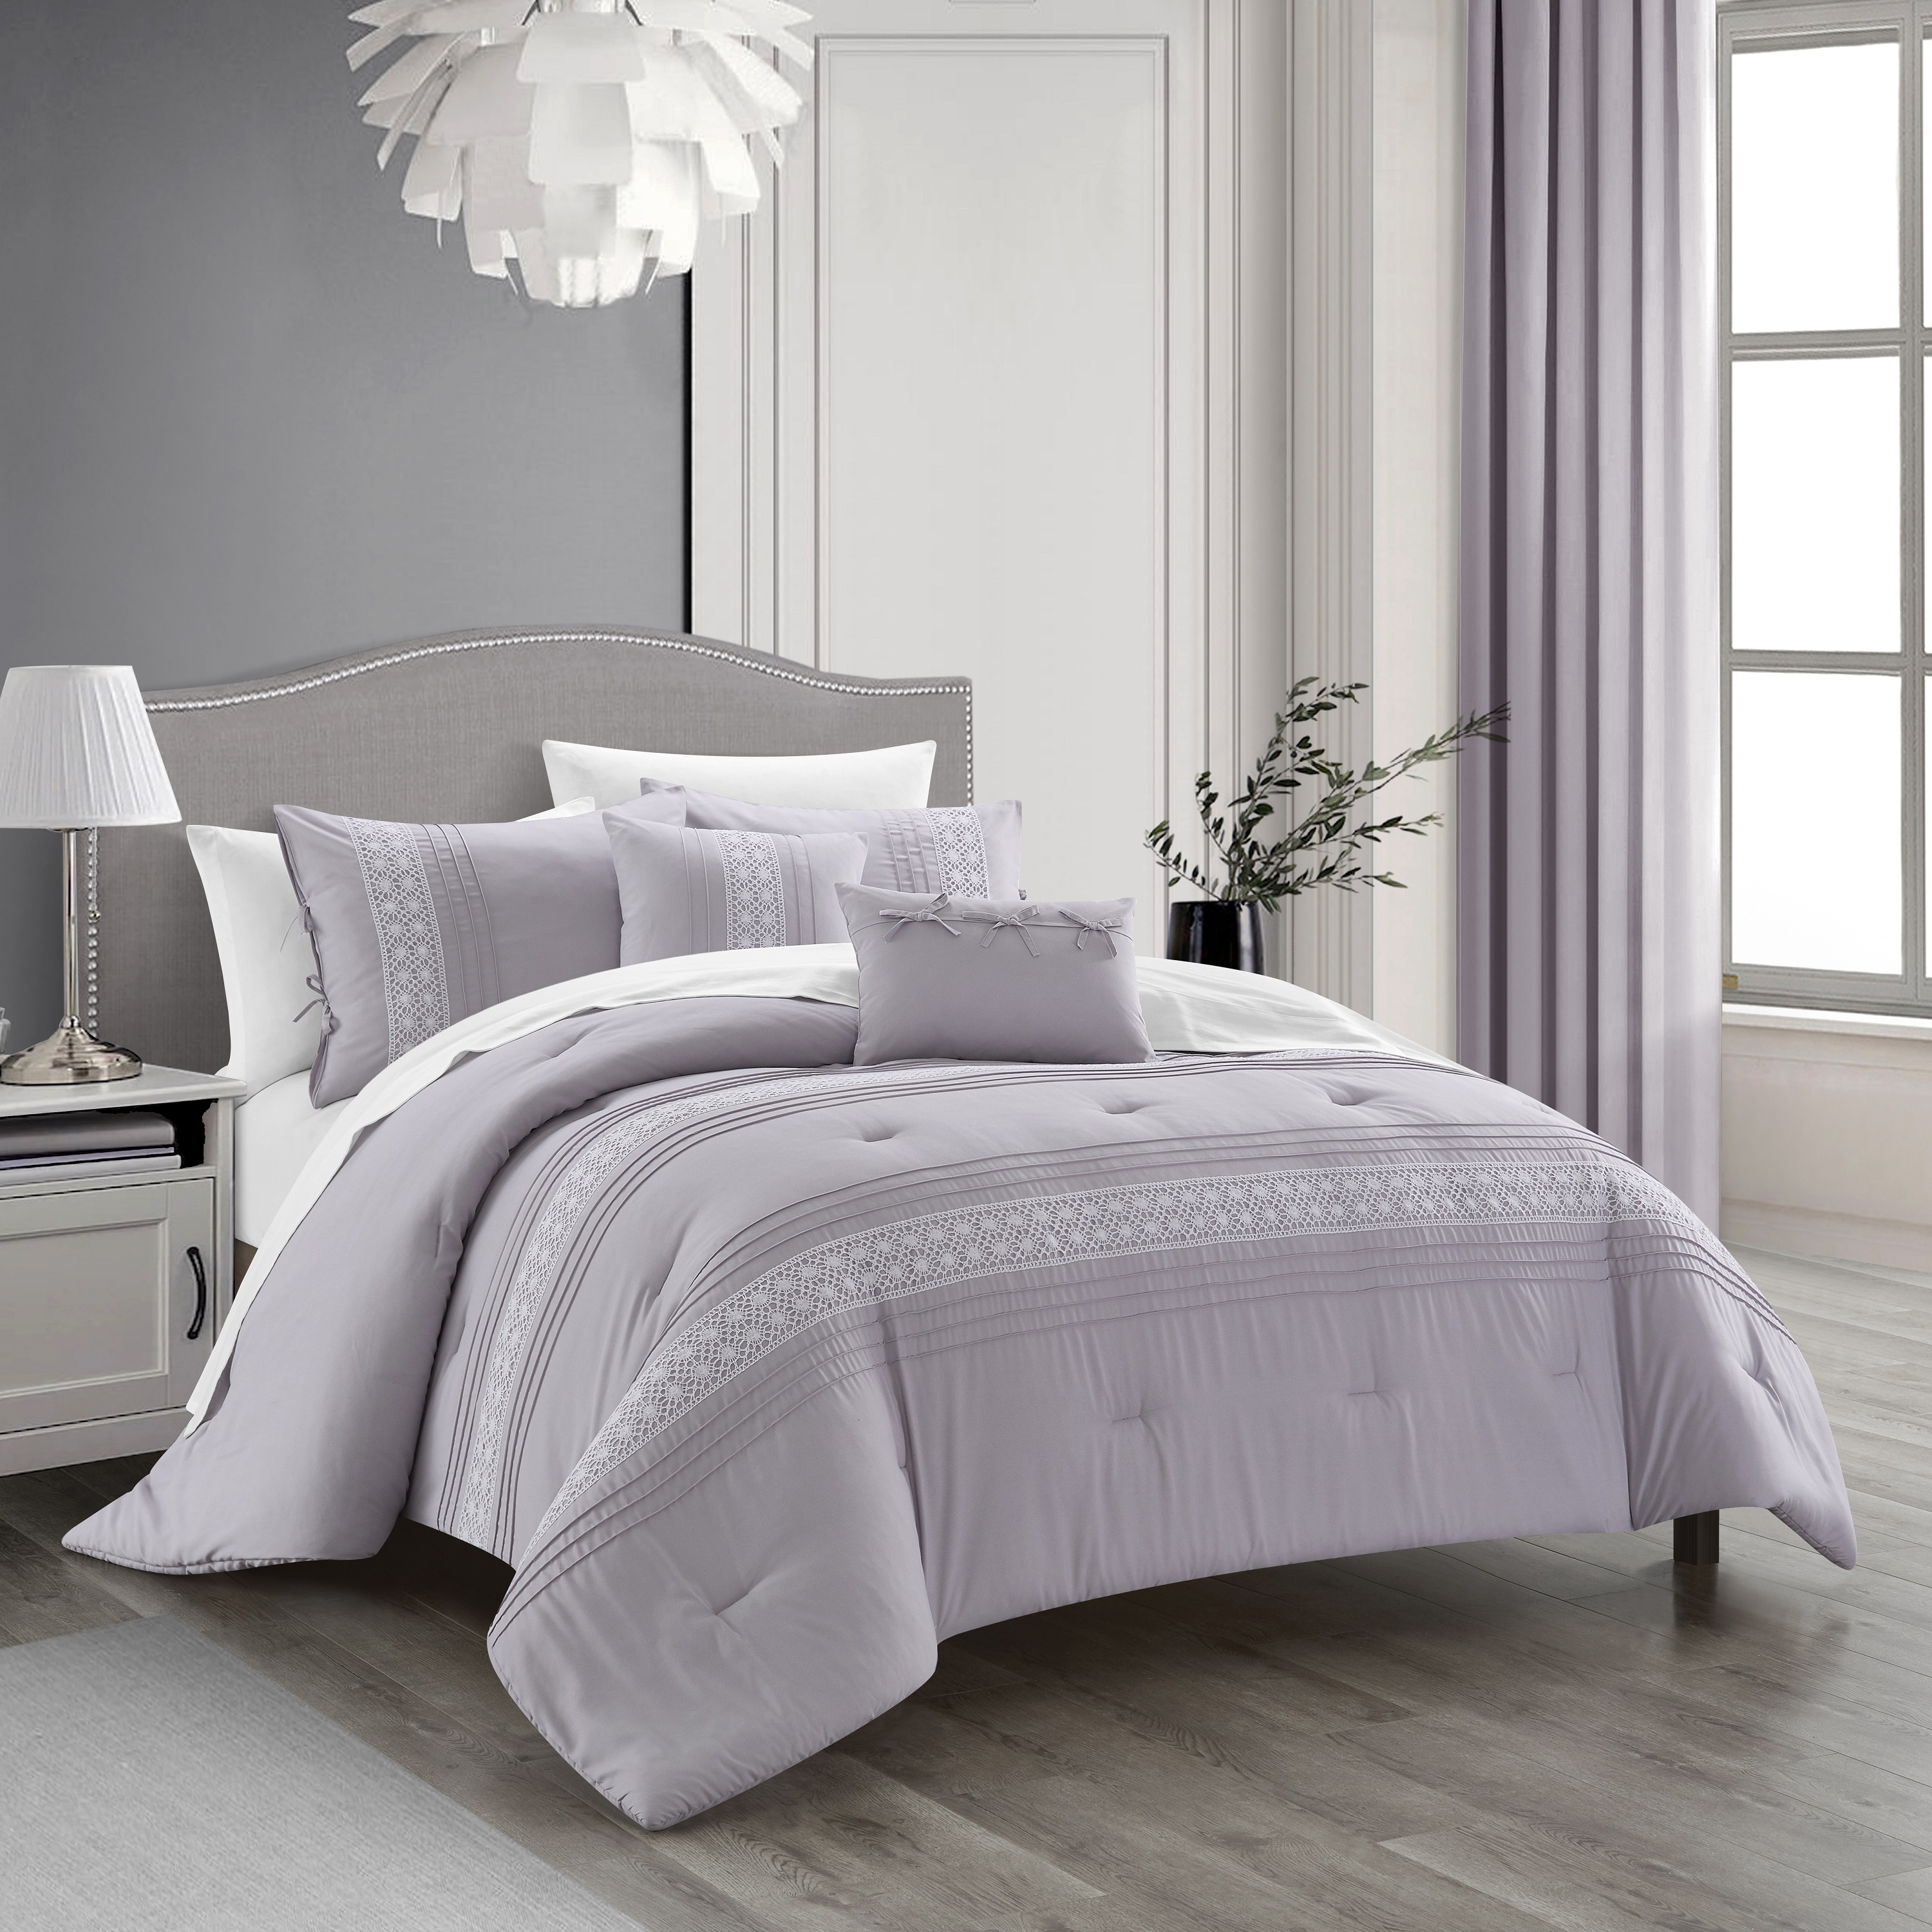 Rycen 5 Piece Comforter Set Pleated Embroidered Design Bedding - Lilac, Twin